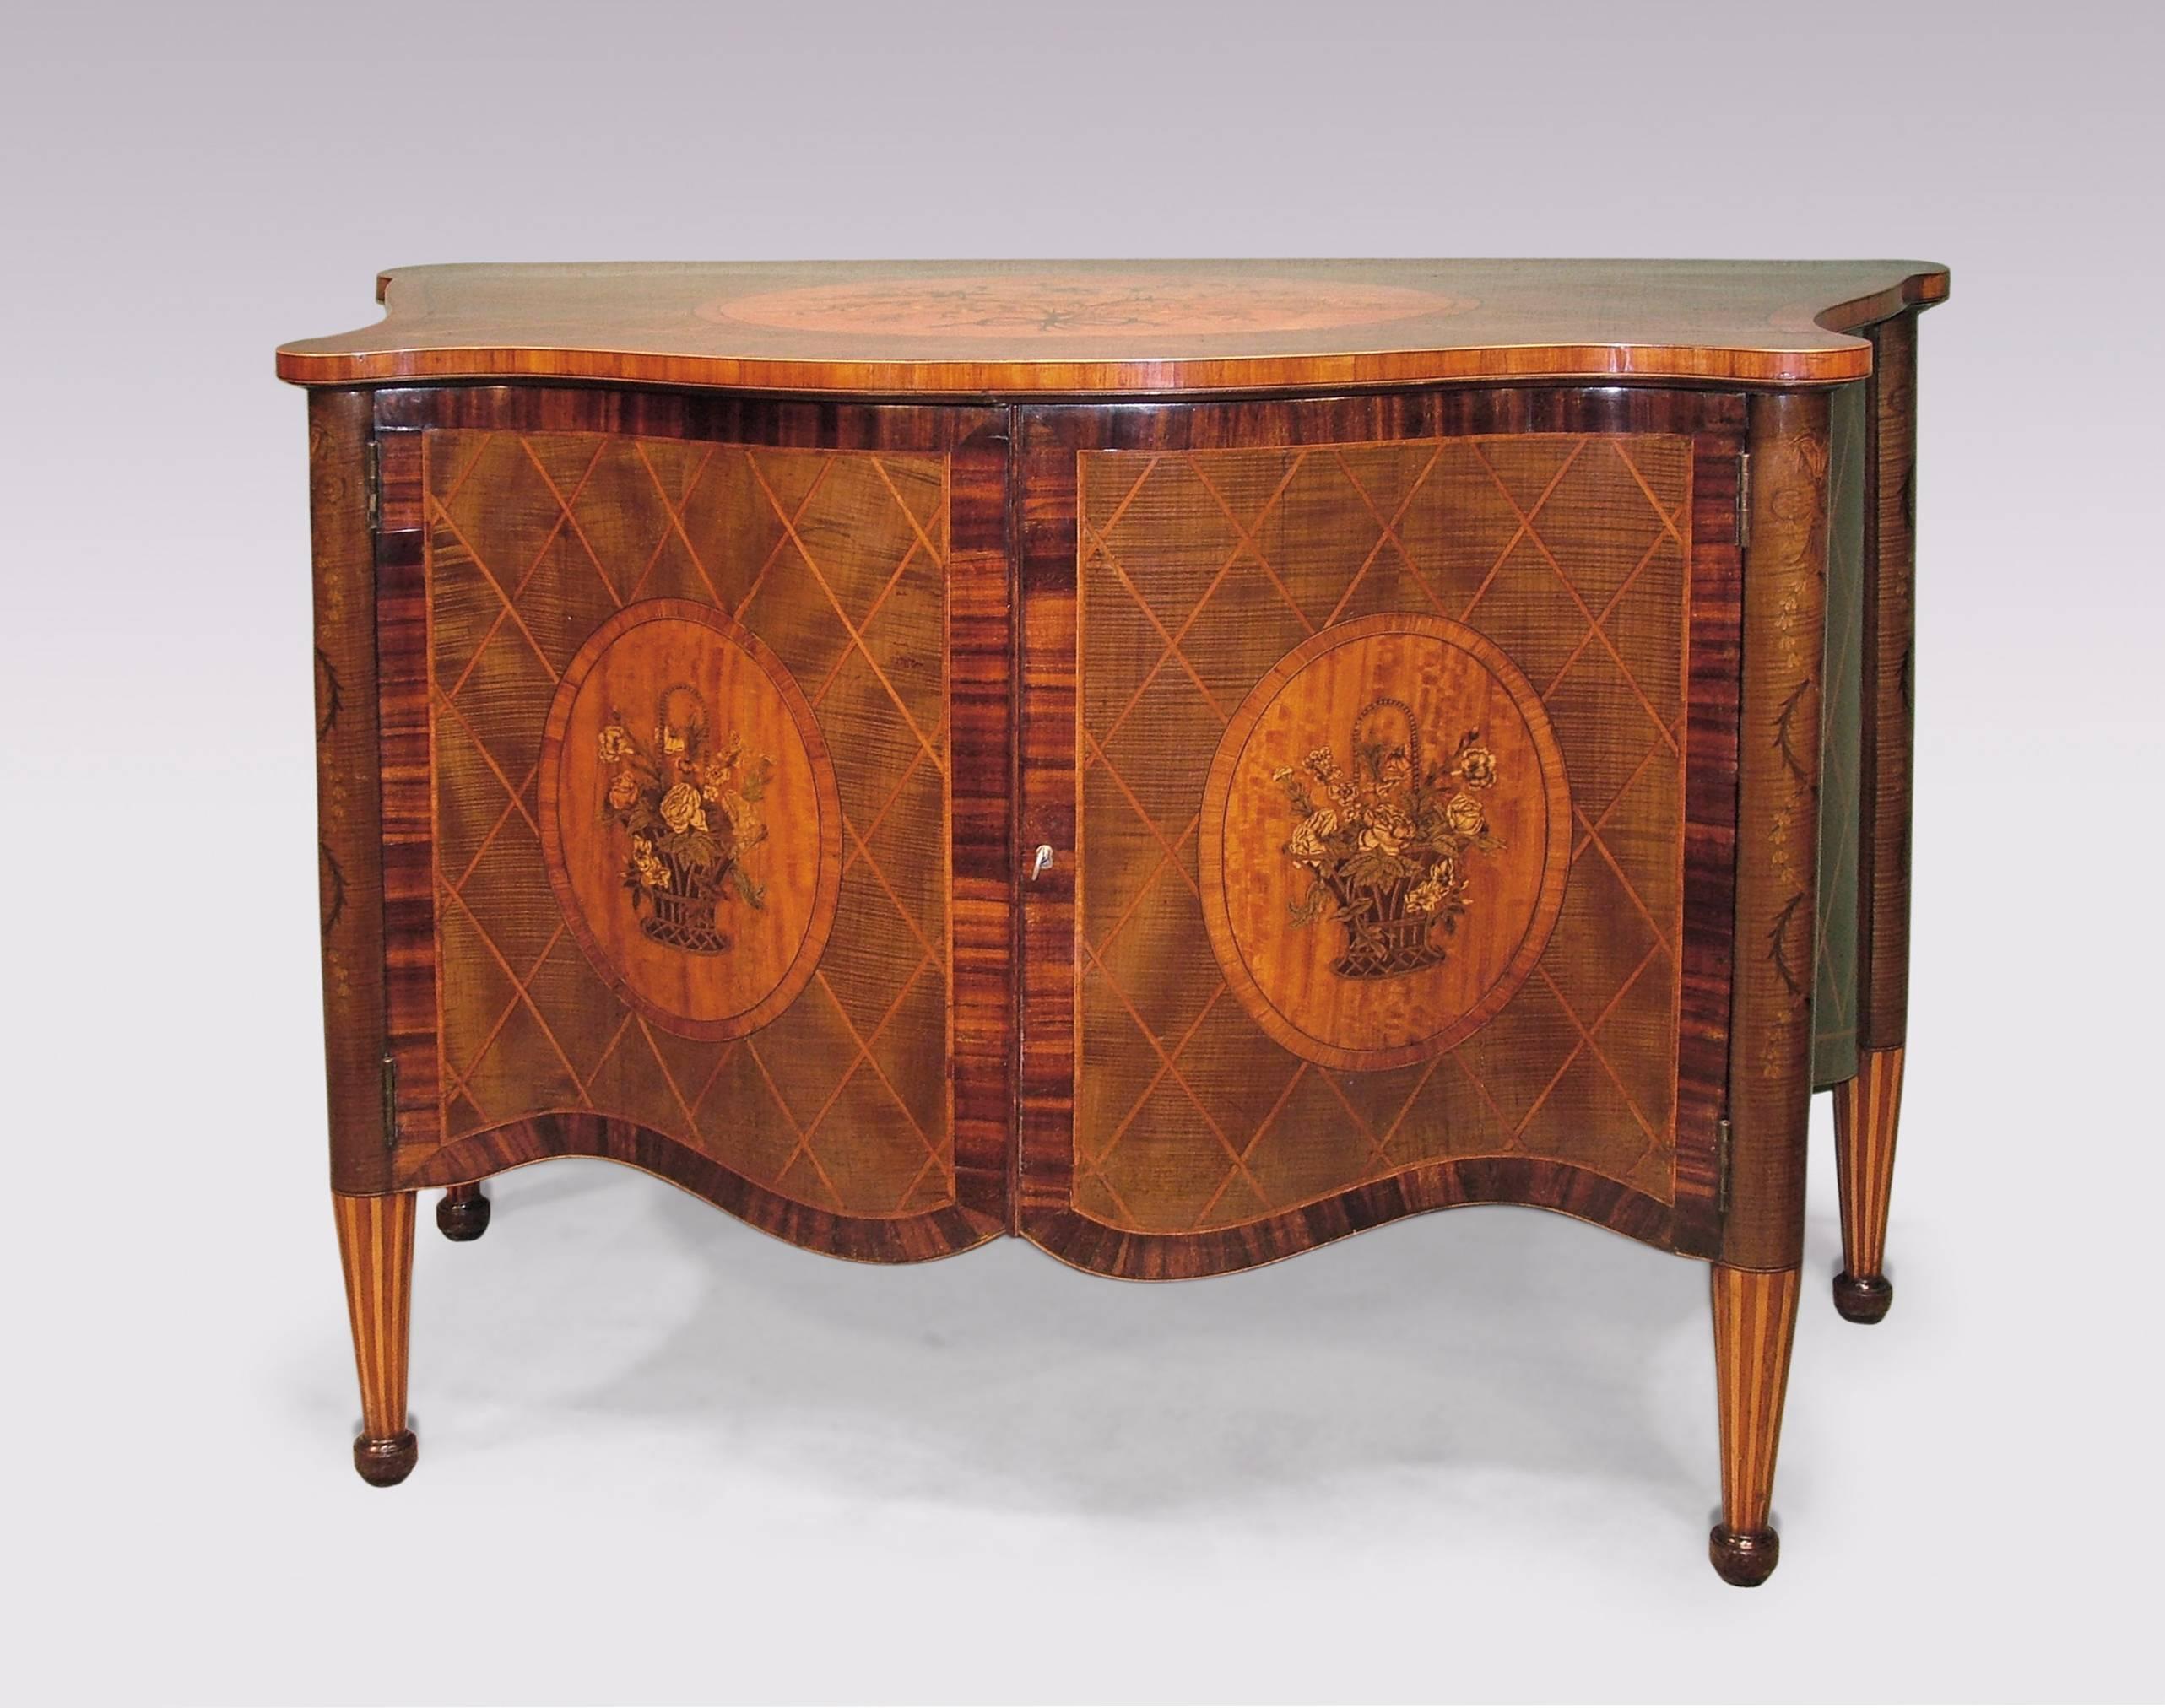 A fine 19th century harewood and diamond lattice-work serpentine commode in the mid-18th century style, having tulipwood crossbanded top with inset oval satinwood floral marquetry inlaid satinwood panel above shaped doors with similar panels inlaid